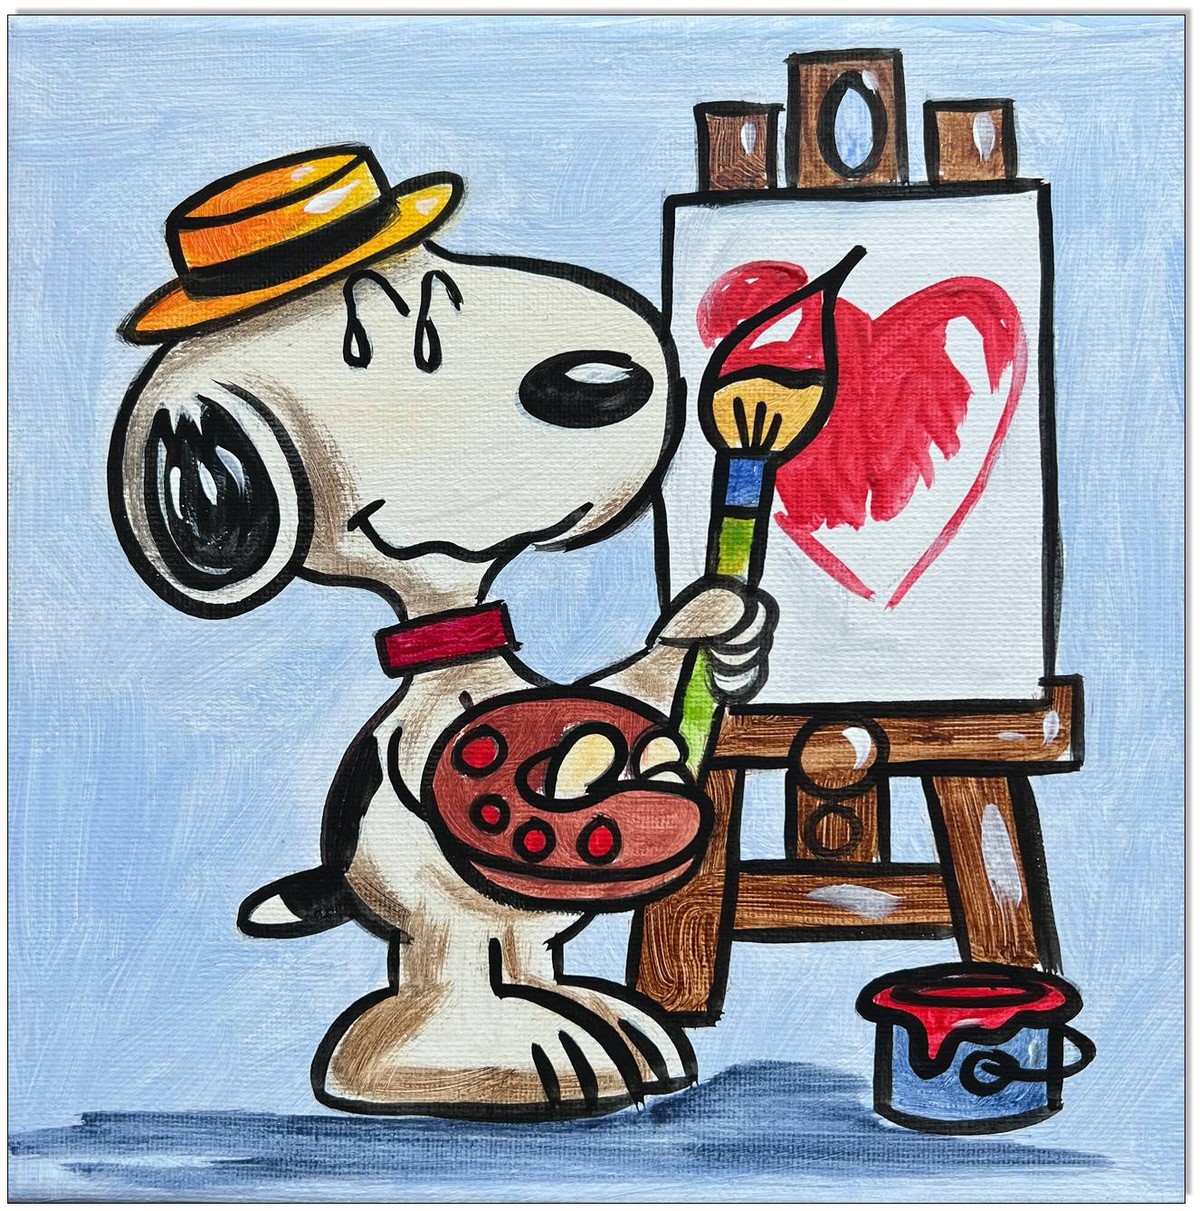 PEANUTS Snoopy The painter - 20 x 20 cm